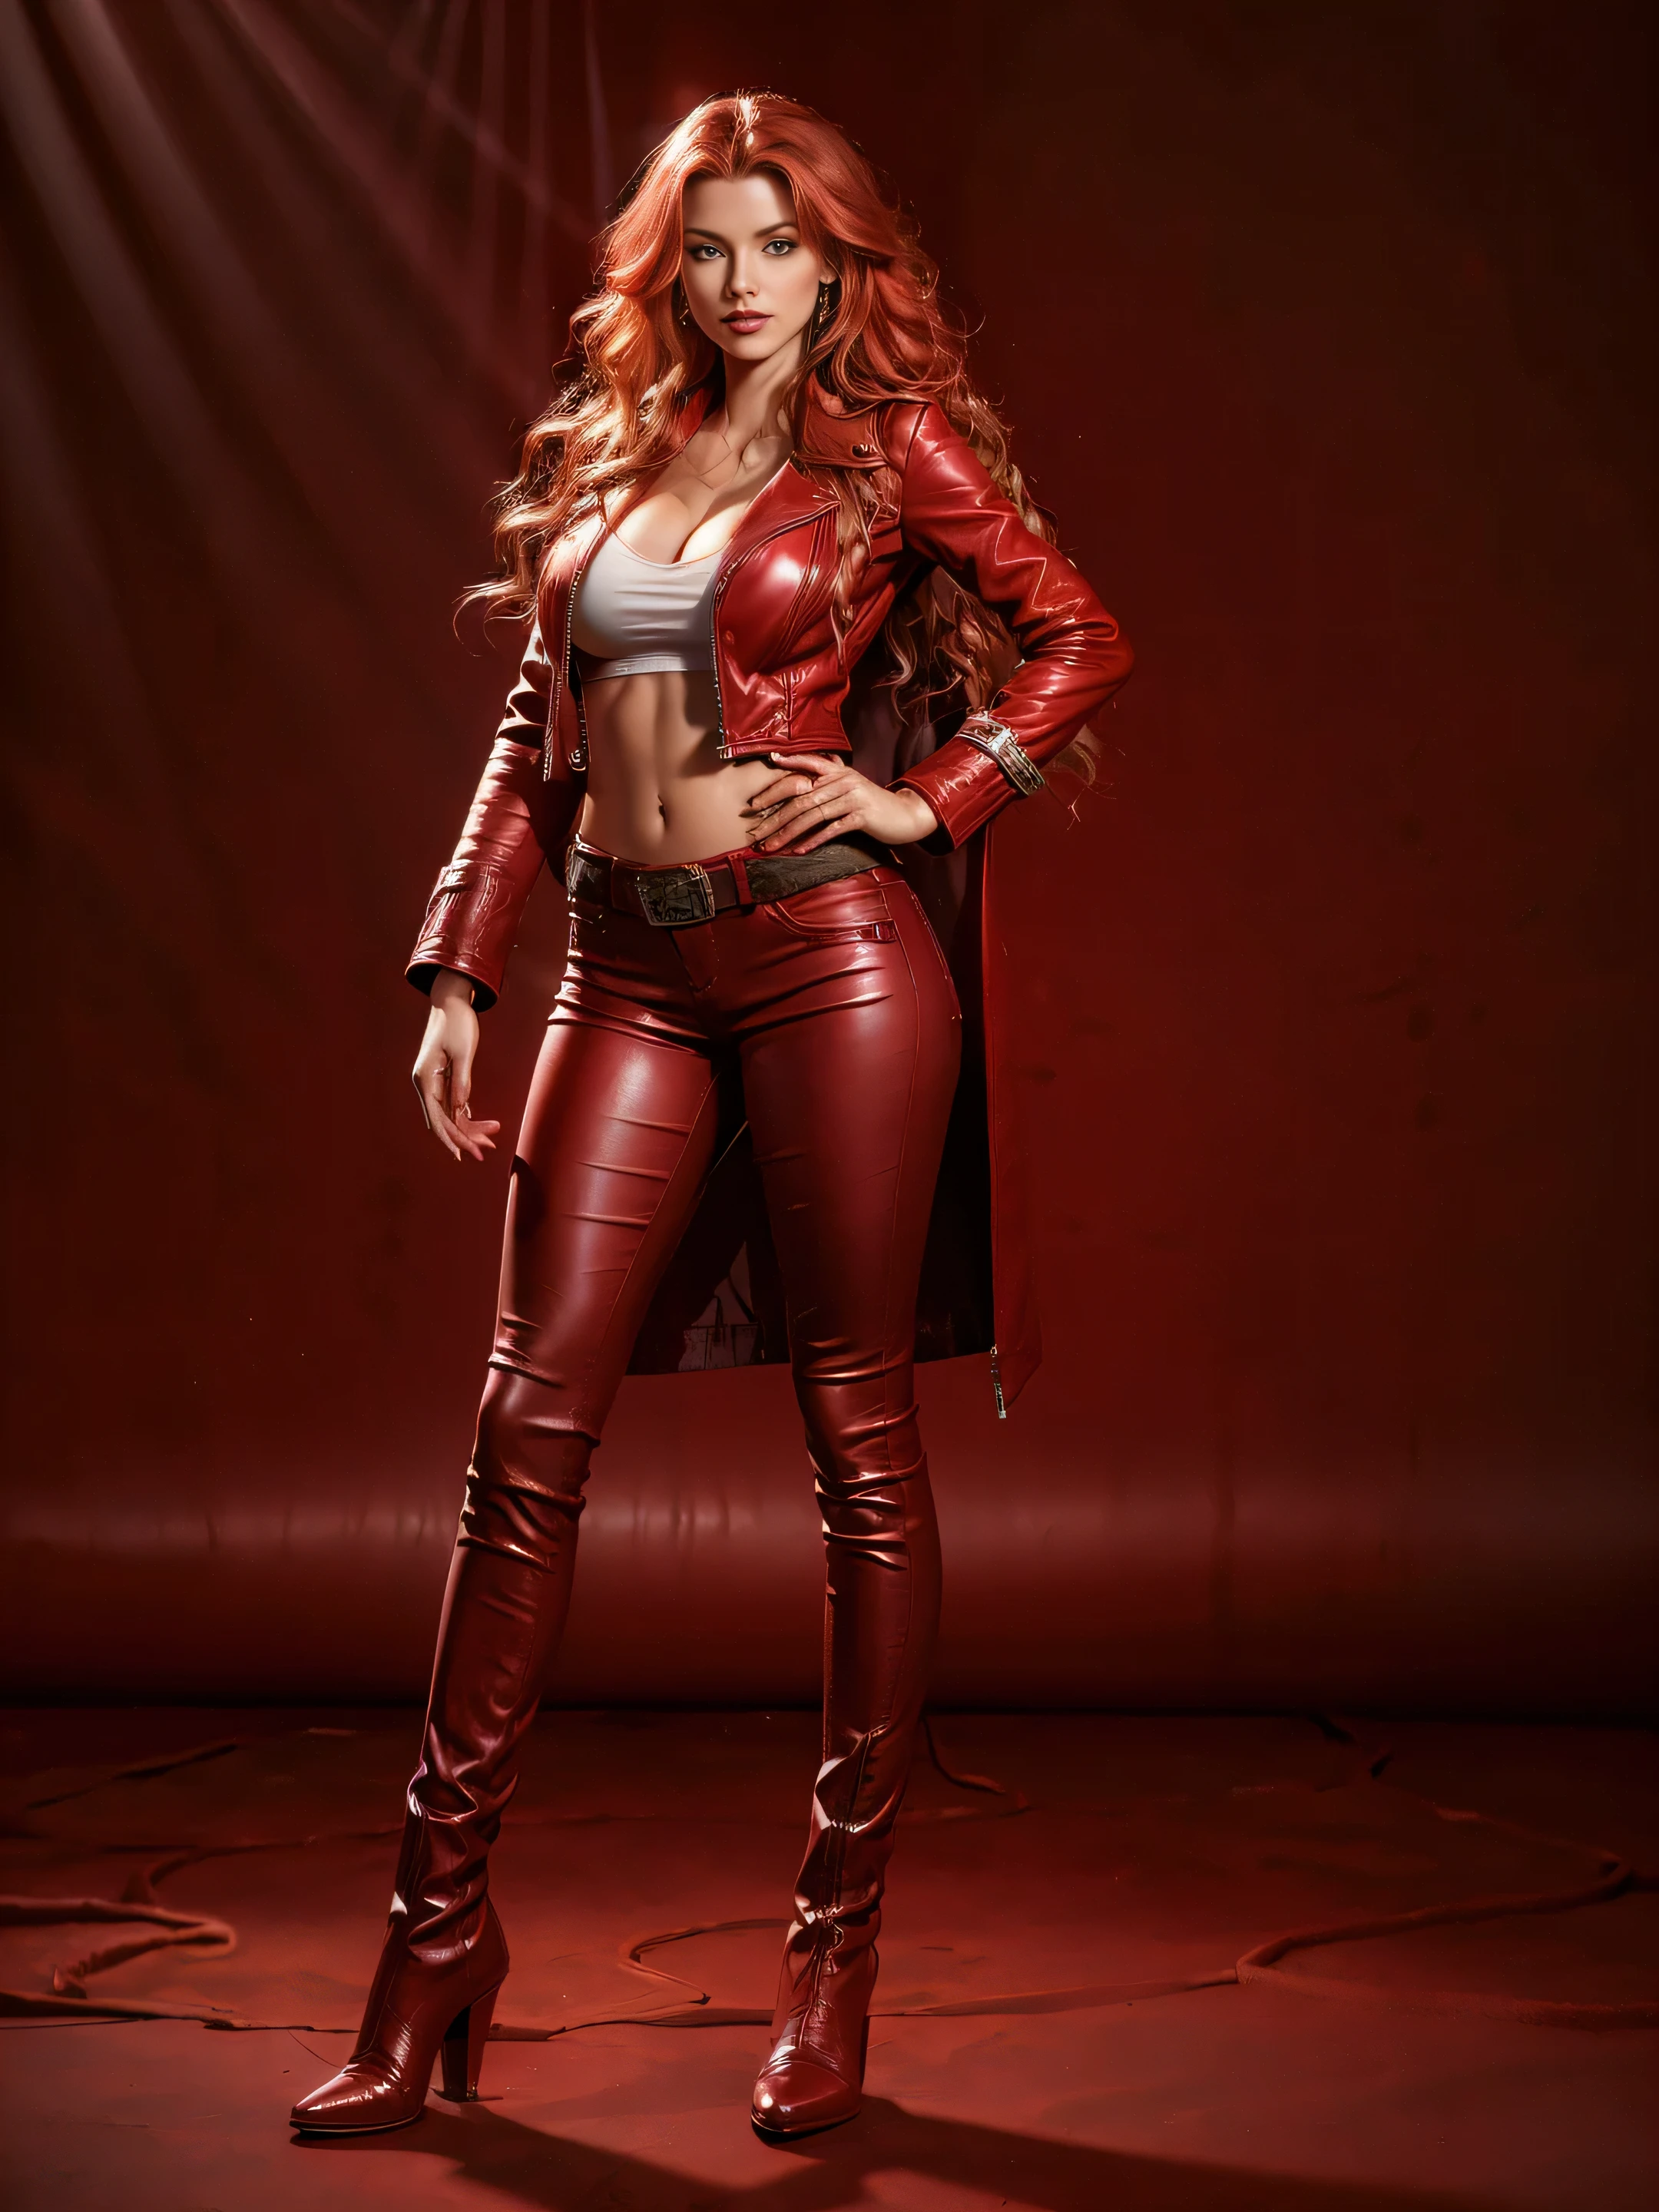 full body women 25 years old green eyes very very long red windblown wavy hair in a red leather jacket red leather pants red leather western boots light shadow effects intricate highly detailed digital bright colors sharp shadows